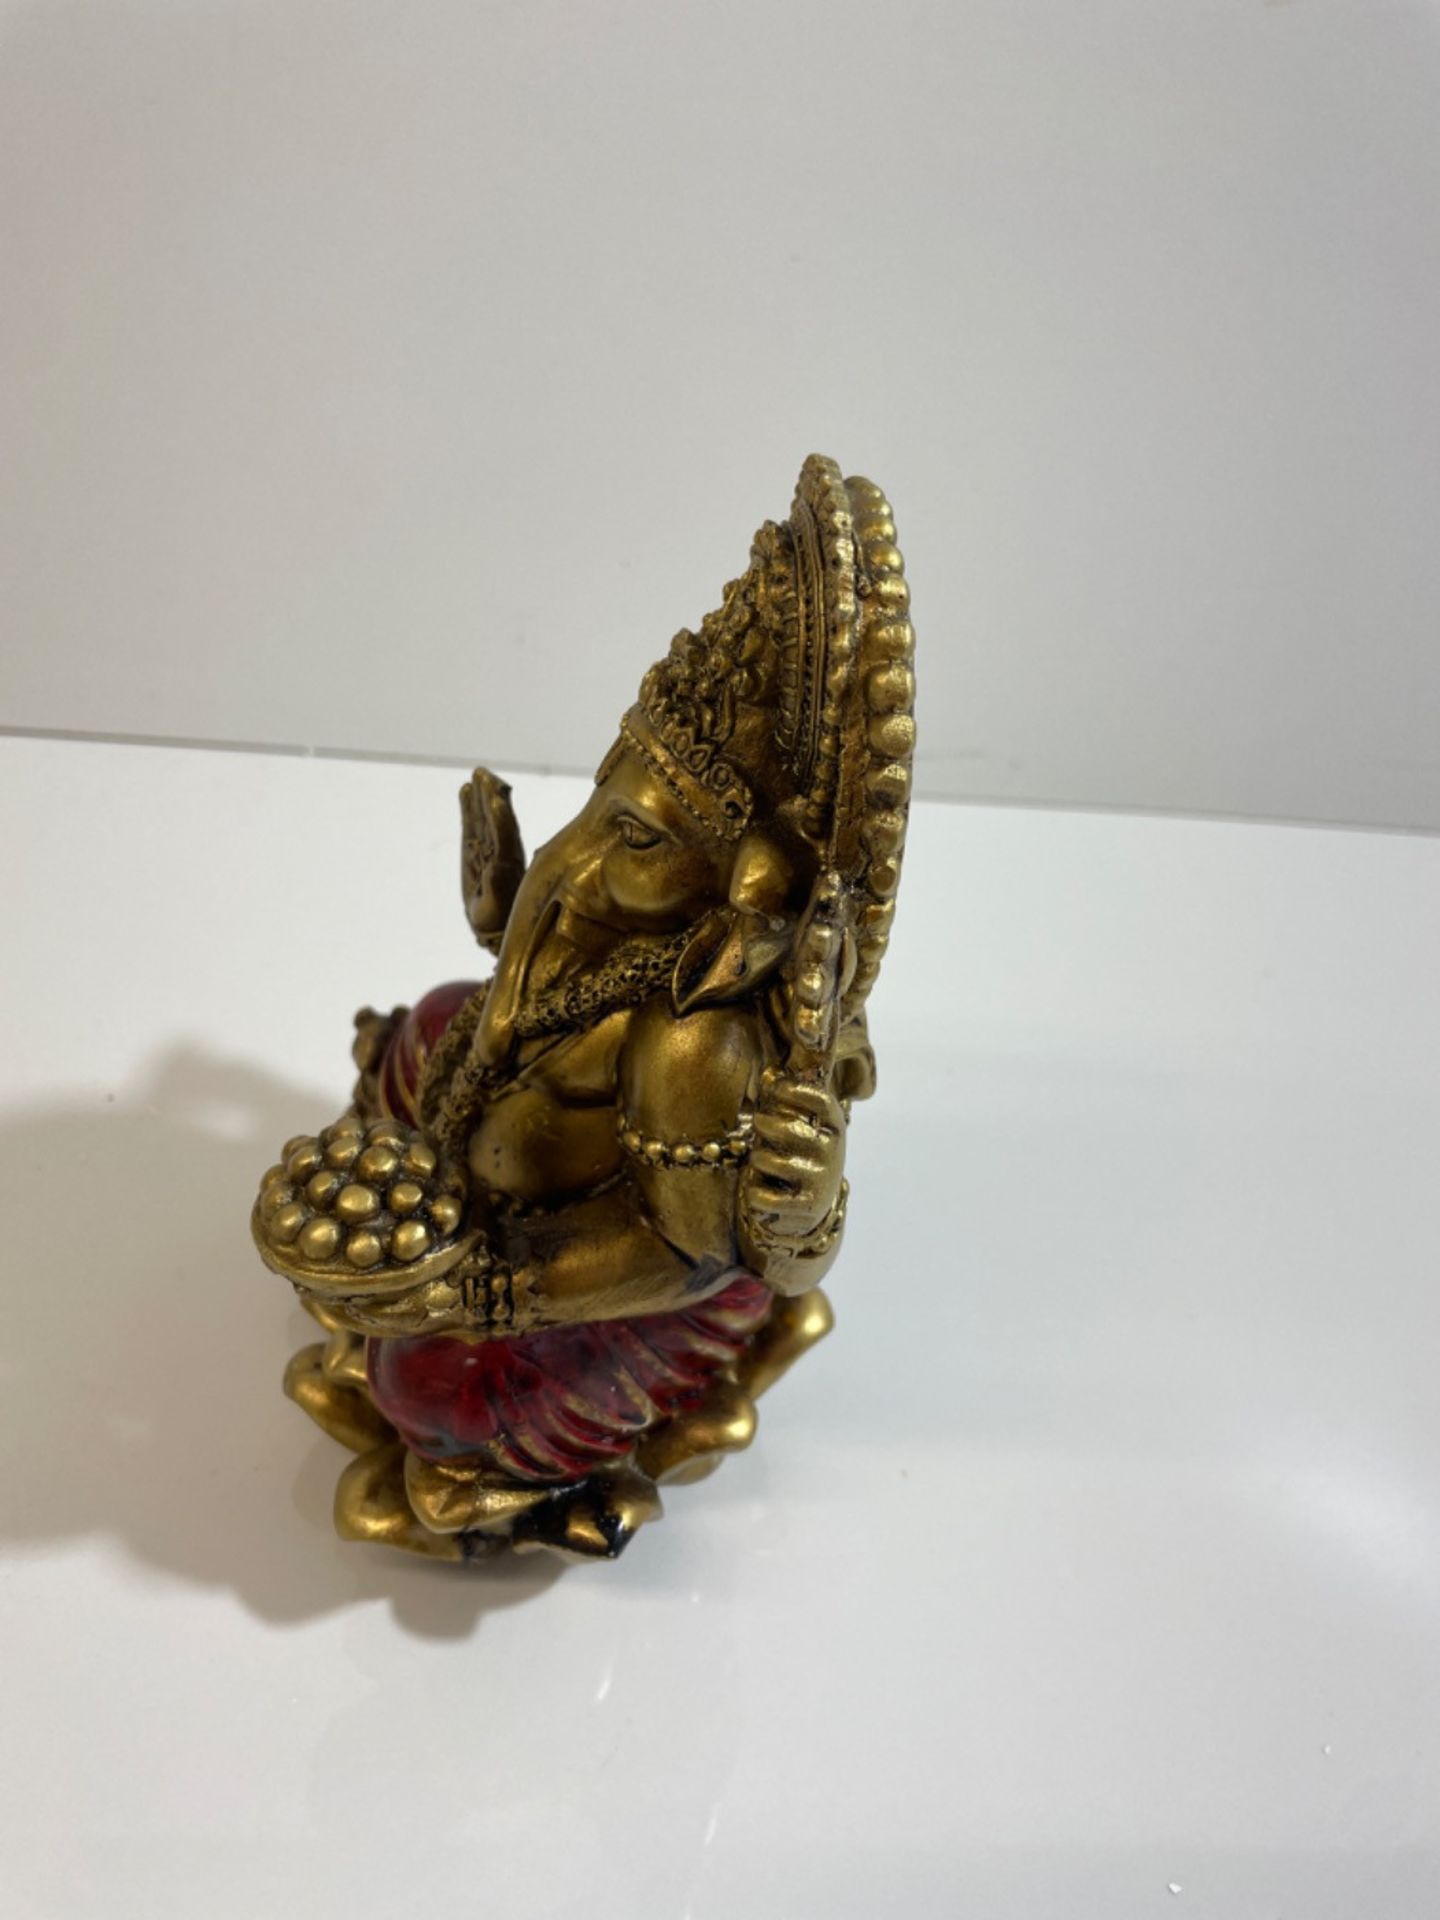 Gold and Red Ganesh Statue 16cm - Image 3 of 3